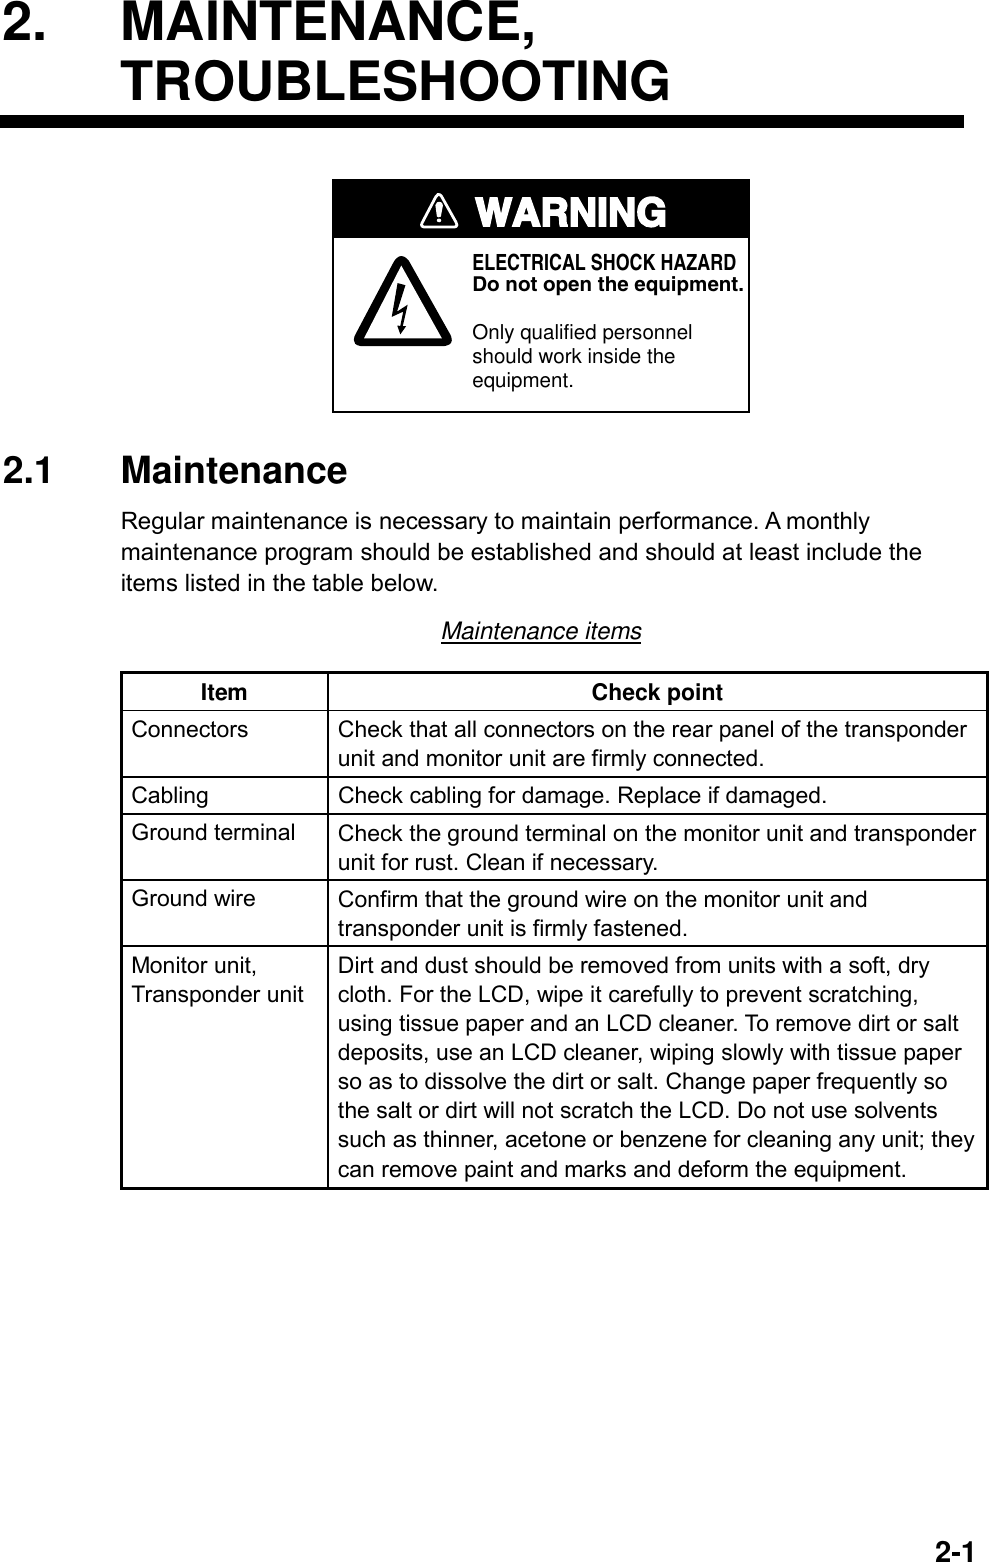   2-12. MAINTENANCE, TROUBLESHOOTING WARNINGELECTRICAL SHOCK HAZARDDo not open the equipment.Only qualified personnelshould work inside theequipment. 2.1 Maintenance Regular maintenance is necessary to maintain performance. A monthly maintenance program should be established and should at least include the items listed in the table below. Maintenance items Item Check point Connectors  Check that all connectors on the rear panel of the transponder unit and monitor unit are firmly connected. Cabling  Check cabling for damage. Replace if damaged. Ground terminal  Check the ground terminal on the monitor unit and transponder unit for rust. Clean if necessary. Ground wire  Confirm that the ground wire on the monitor unit and transponder unit is firmly fastened. Monitor unit, Transponder unit Dirt and dust should be removed from units with a soft, dry cloth. For the LCD, wipe it carefully to prevent scratching, using tissue paper and an LCD cleaner. To remove dirt or salt deposits, use an LCD cleaner, wiping slowly with tissue paper so as to dissolve the dirt or salt. Change paper frequently so the salt or dirt will not scratch the LCD. Do not use solvents such as thinner, acetone or benzene for cleaning any unit; they can remove paint and marks and deform the equipment.  